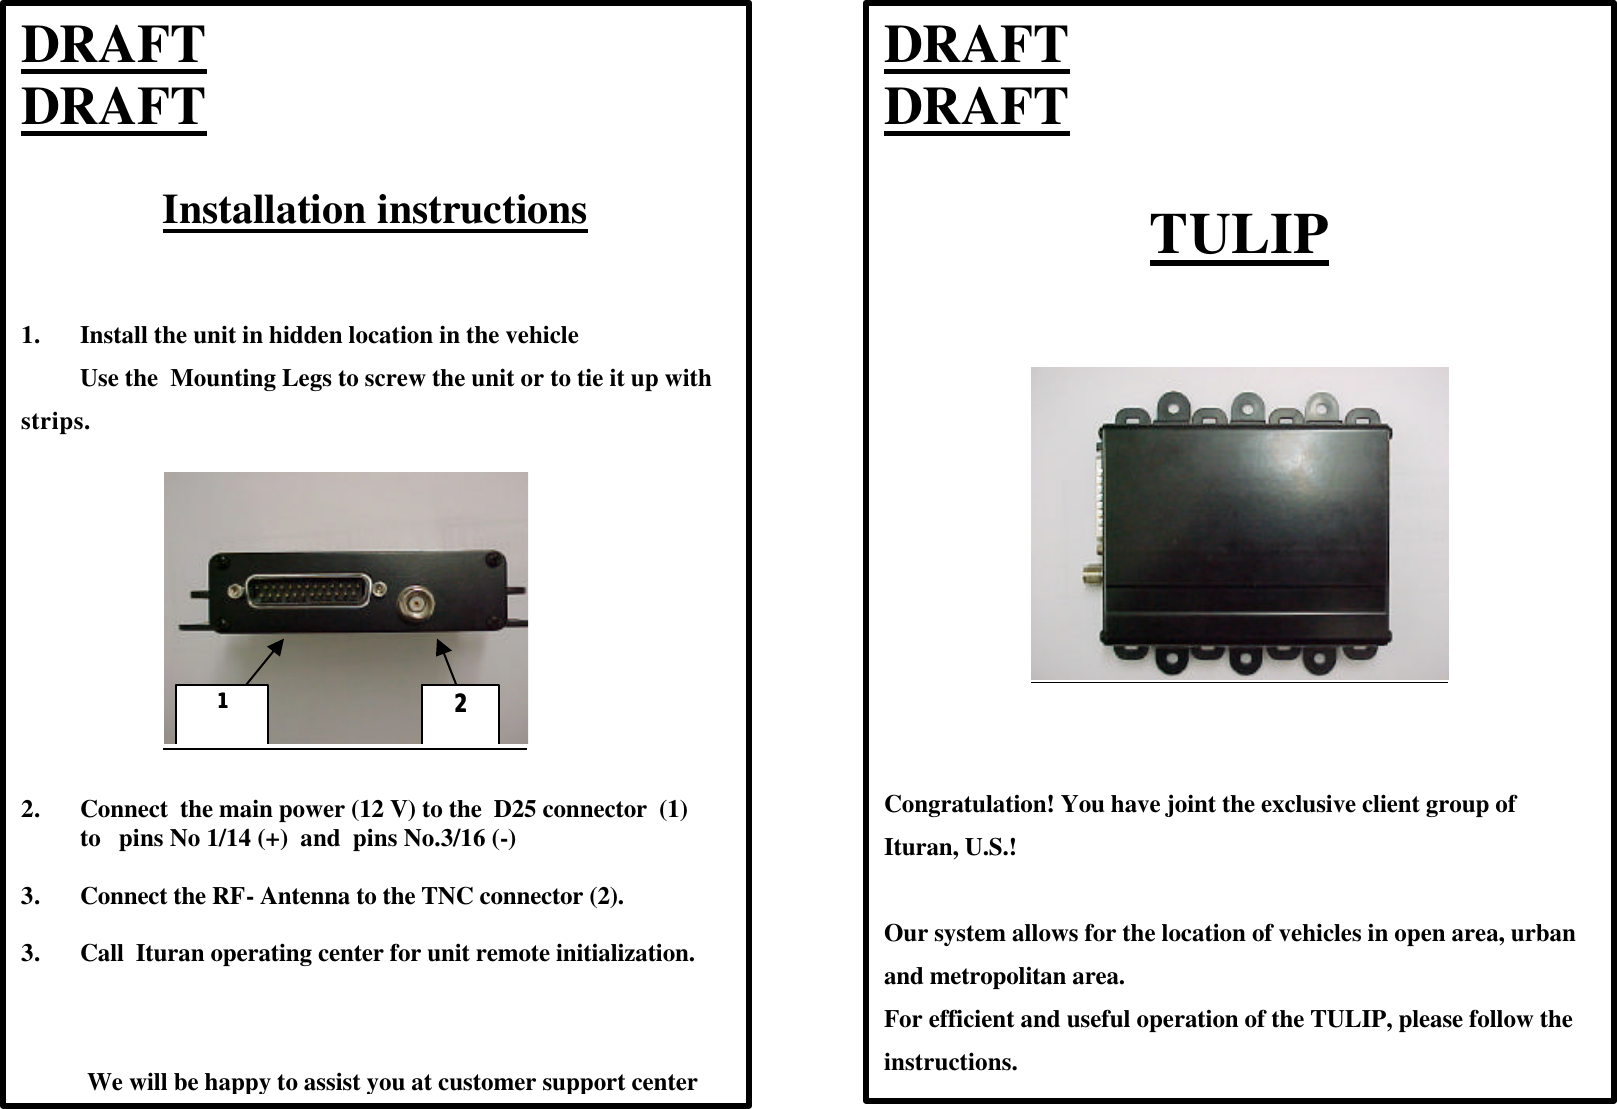  DRAFT                             DRAFT  TULIP           Congratulation! You have joint the exclusive client group of Ituran, U.S.!  Our system allows for the location of vehicles in open area, urban and metropolitan area.  For efficient and useful operation of the TULIP, please follow the instructions.  DRAFT                             DRAFT  Installation instructions    1. Install the unit in hidden location in the vehicle Use the  Mounting Legs to screw the unit or to tie it up with strips.     11    22   2. Connect  the main power (12 V) to the  D25 connector  (1)  to   pins No 1/14 (+)  and  pins No.3/16 (-)         3. Connect the RF- Antenna to the TNC connector (2).  3. Call  Ituran operating center for unit remote initialization.                We will be happy to assist you at customer support center  